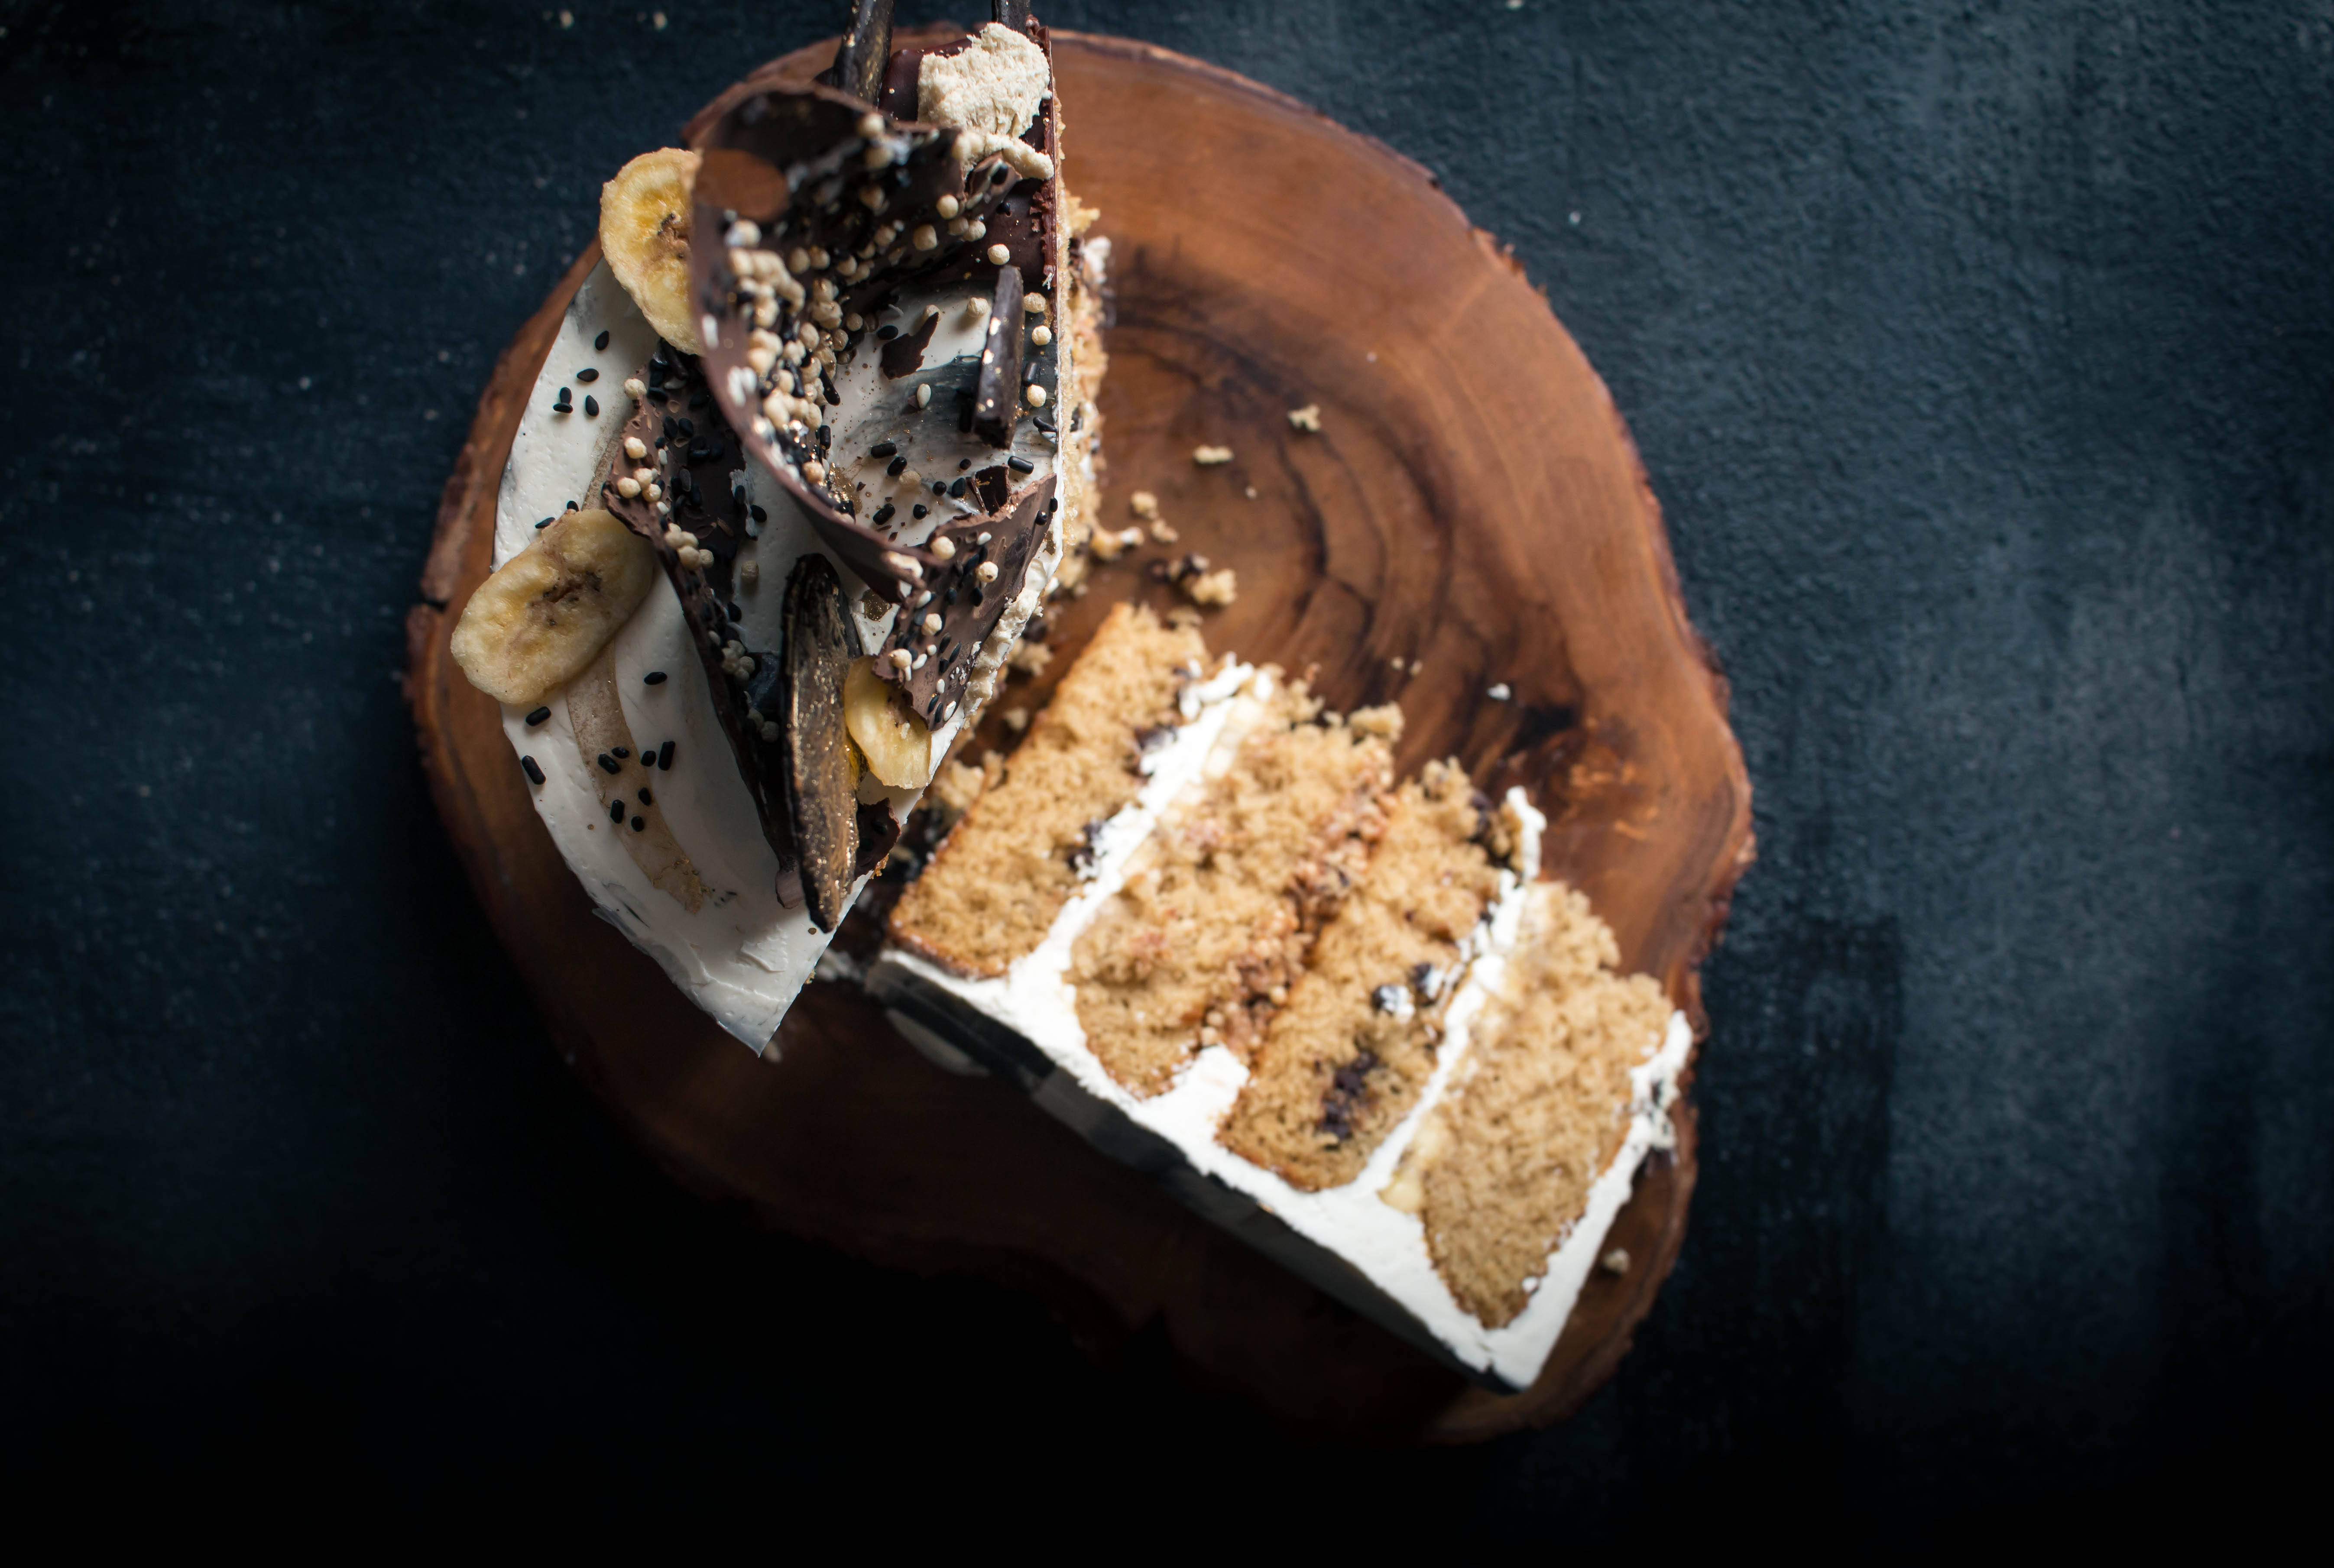 Chocolate Chip Tahini Cake with Bananas and Halva | Recipe from I Will Not Eat Oysters